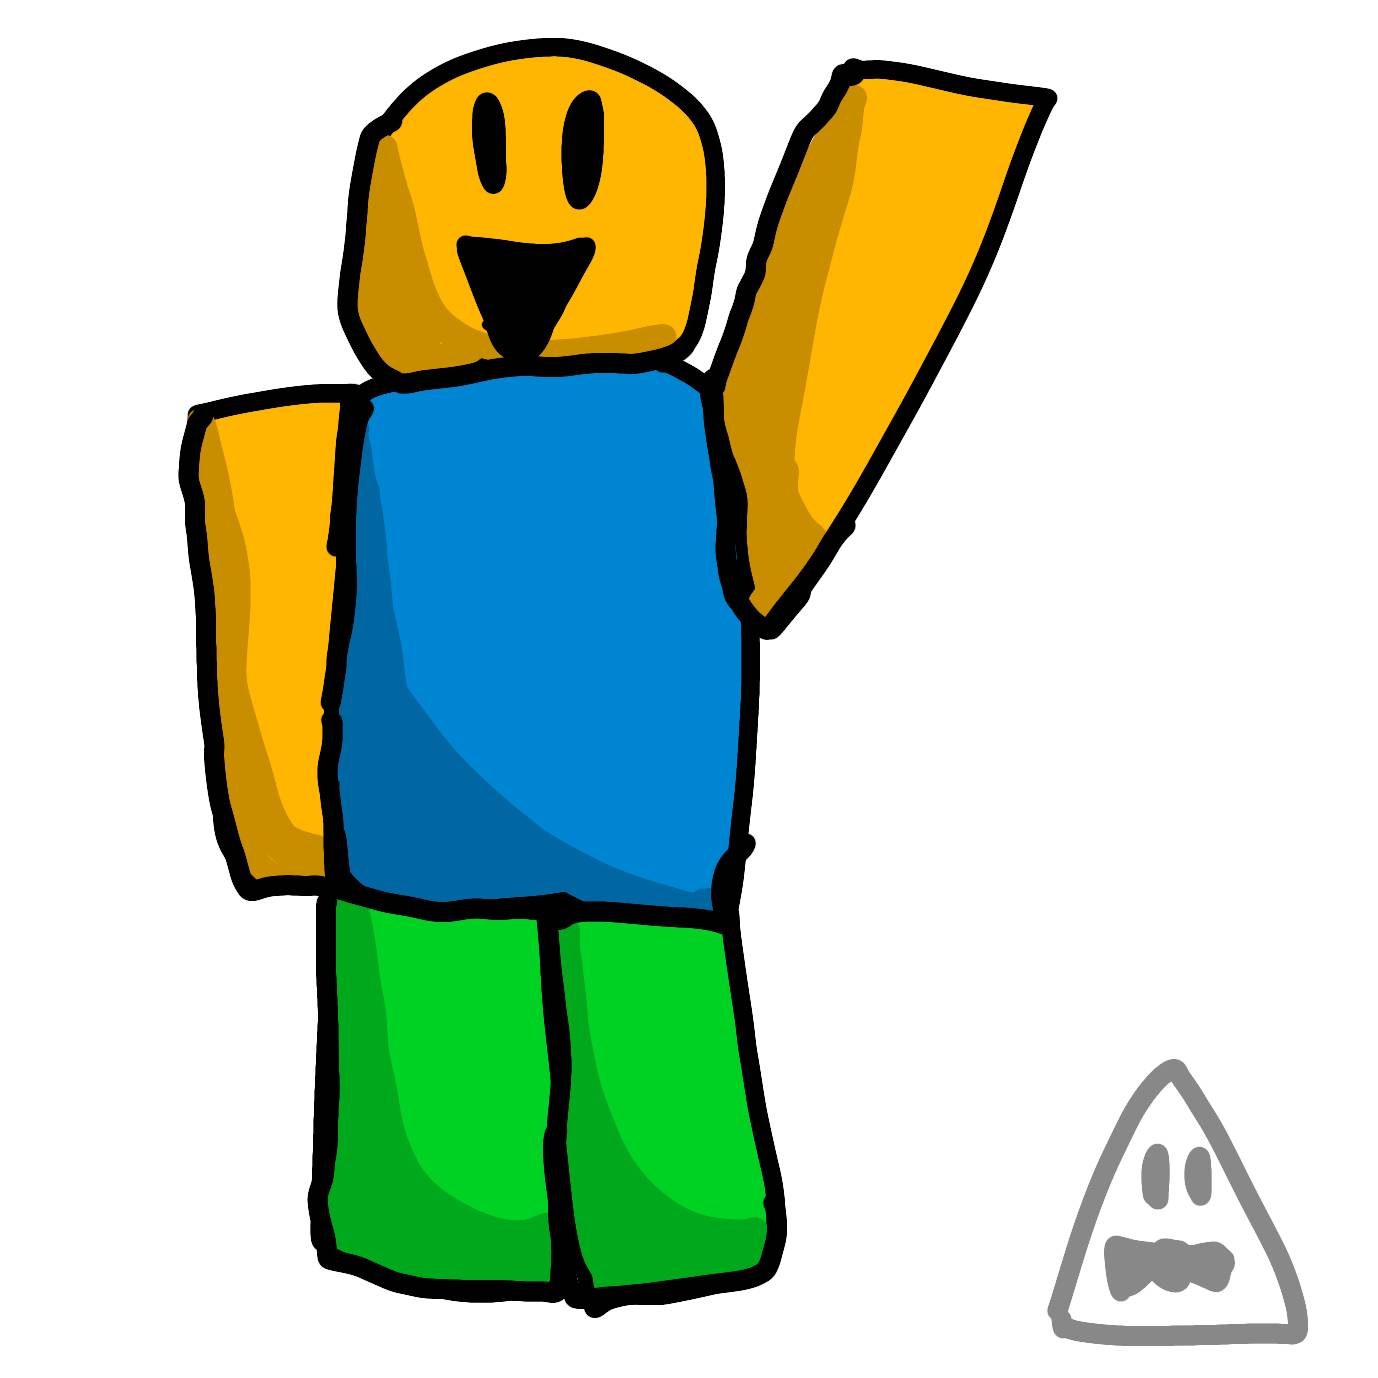 A drawing of a noob.(by my cousin because he asked me to post it.) : r/ roblox